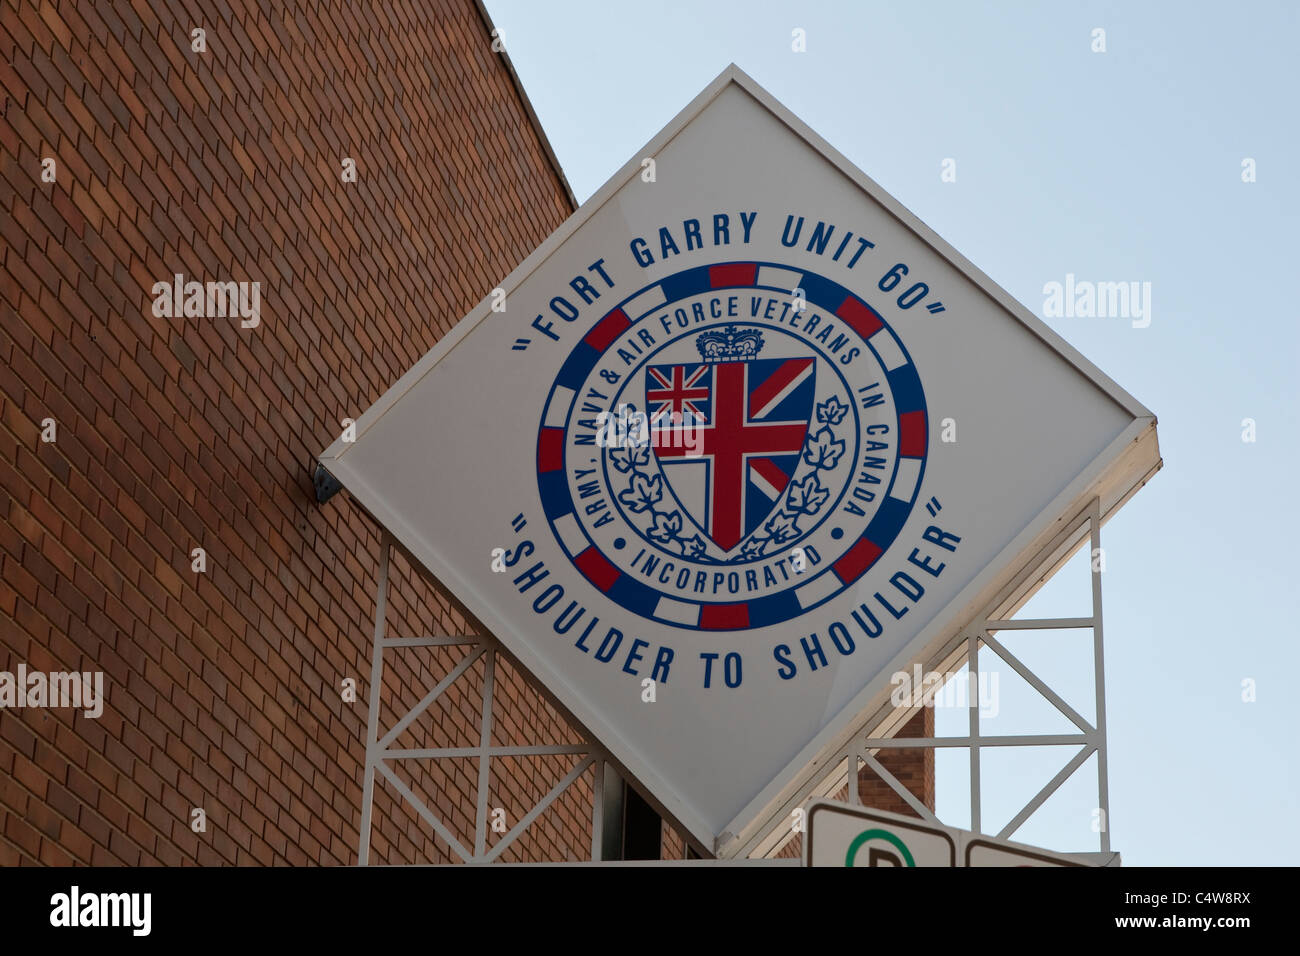 The Fort Garry Unit 60 is pictured in Winnipeg Thursday May 26, 2011. Stock Photo